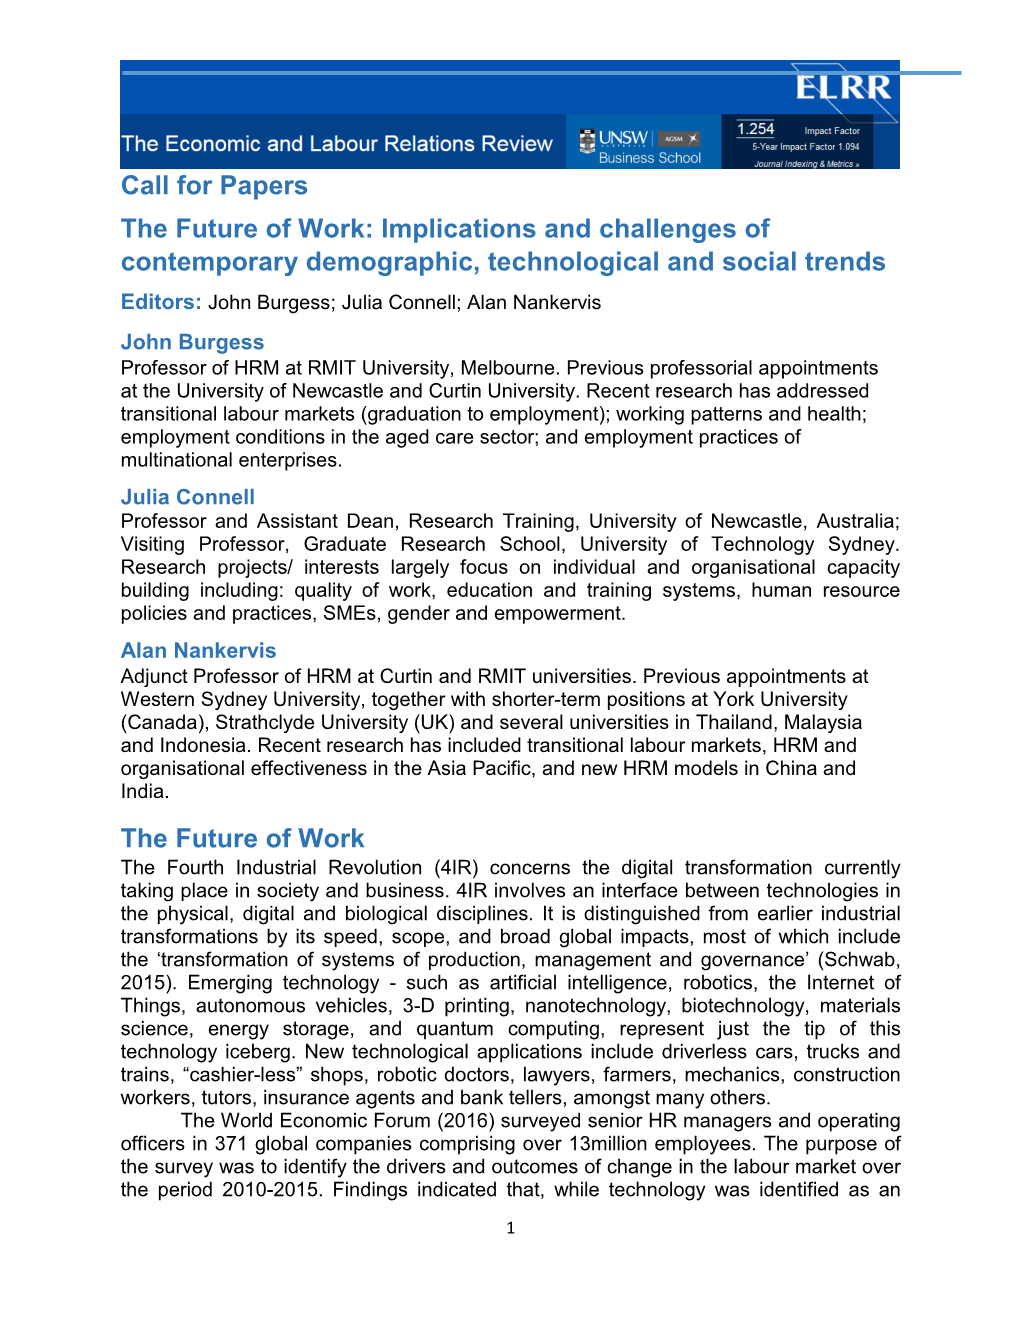 Call for Papers the Future of Work